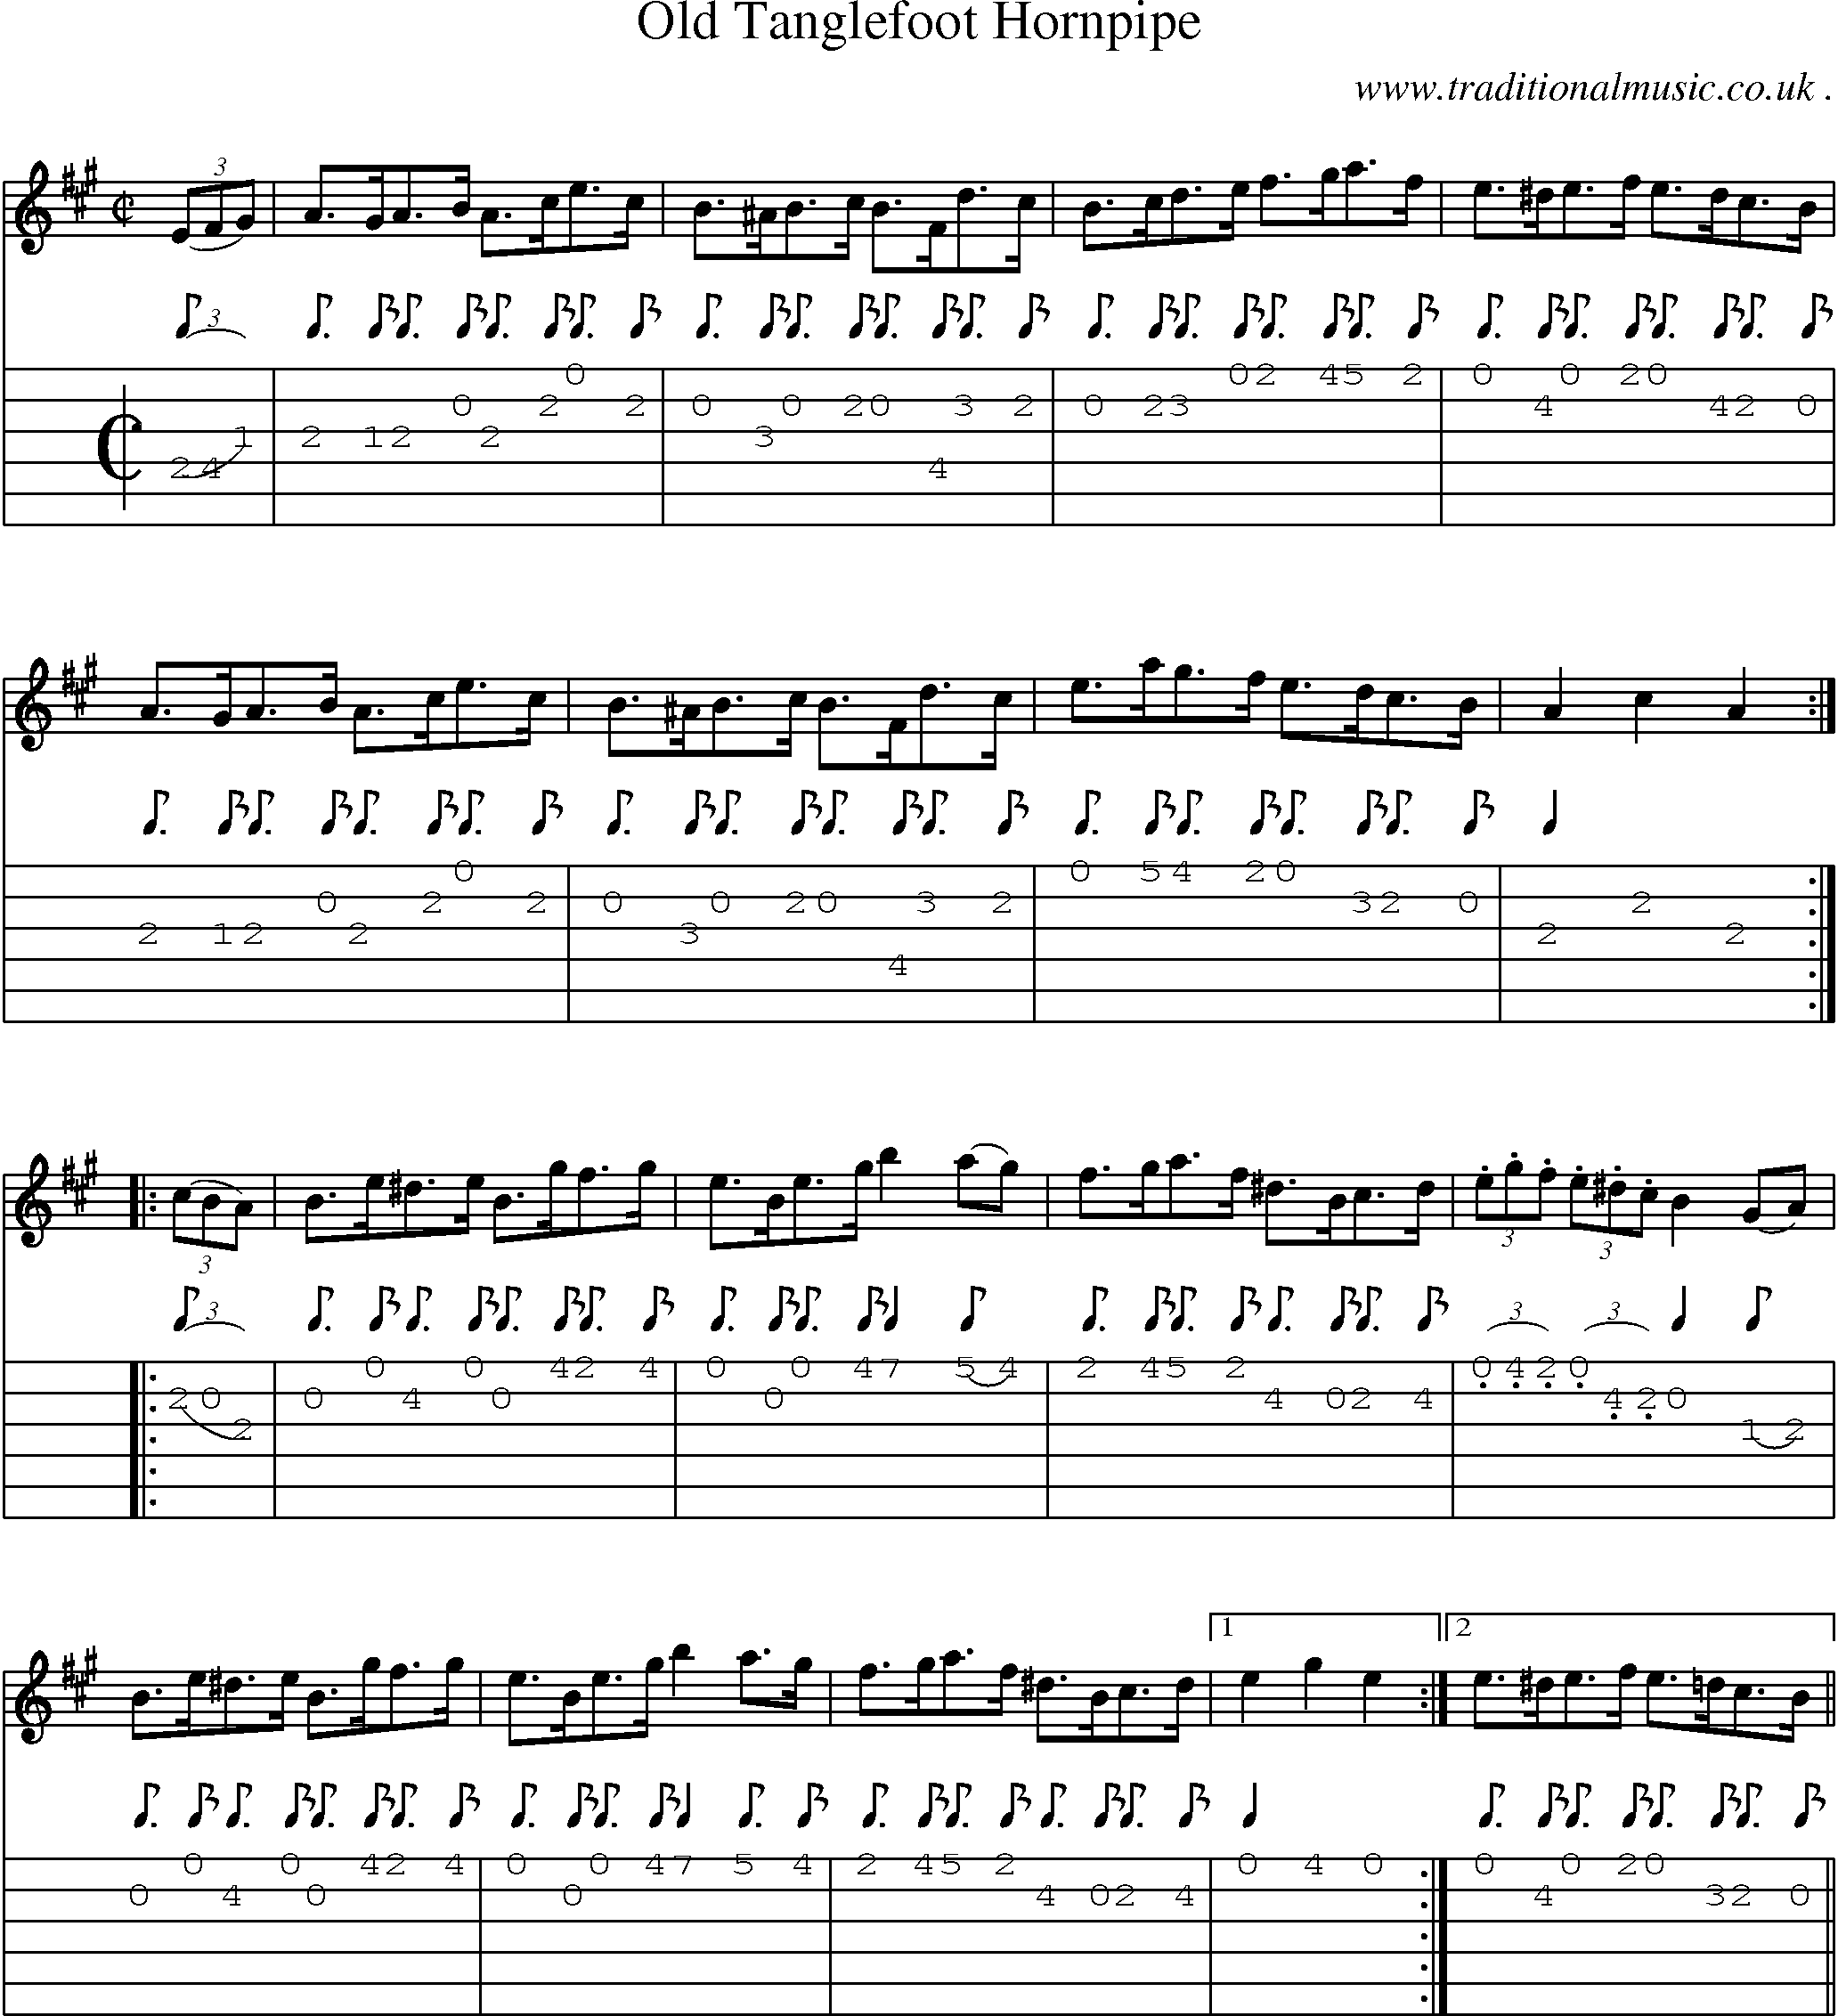 Sheet-Music and Guitar Tabs for Old Tanglefoot Hornpipe